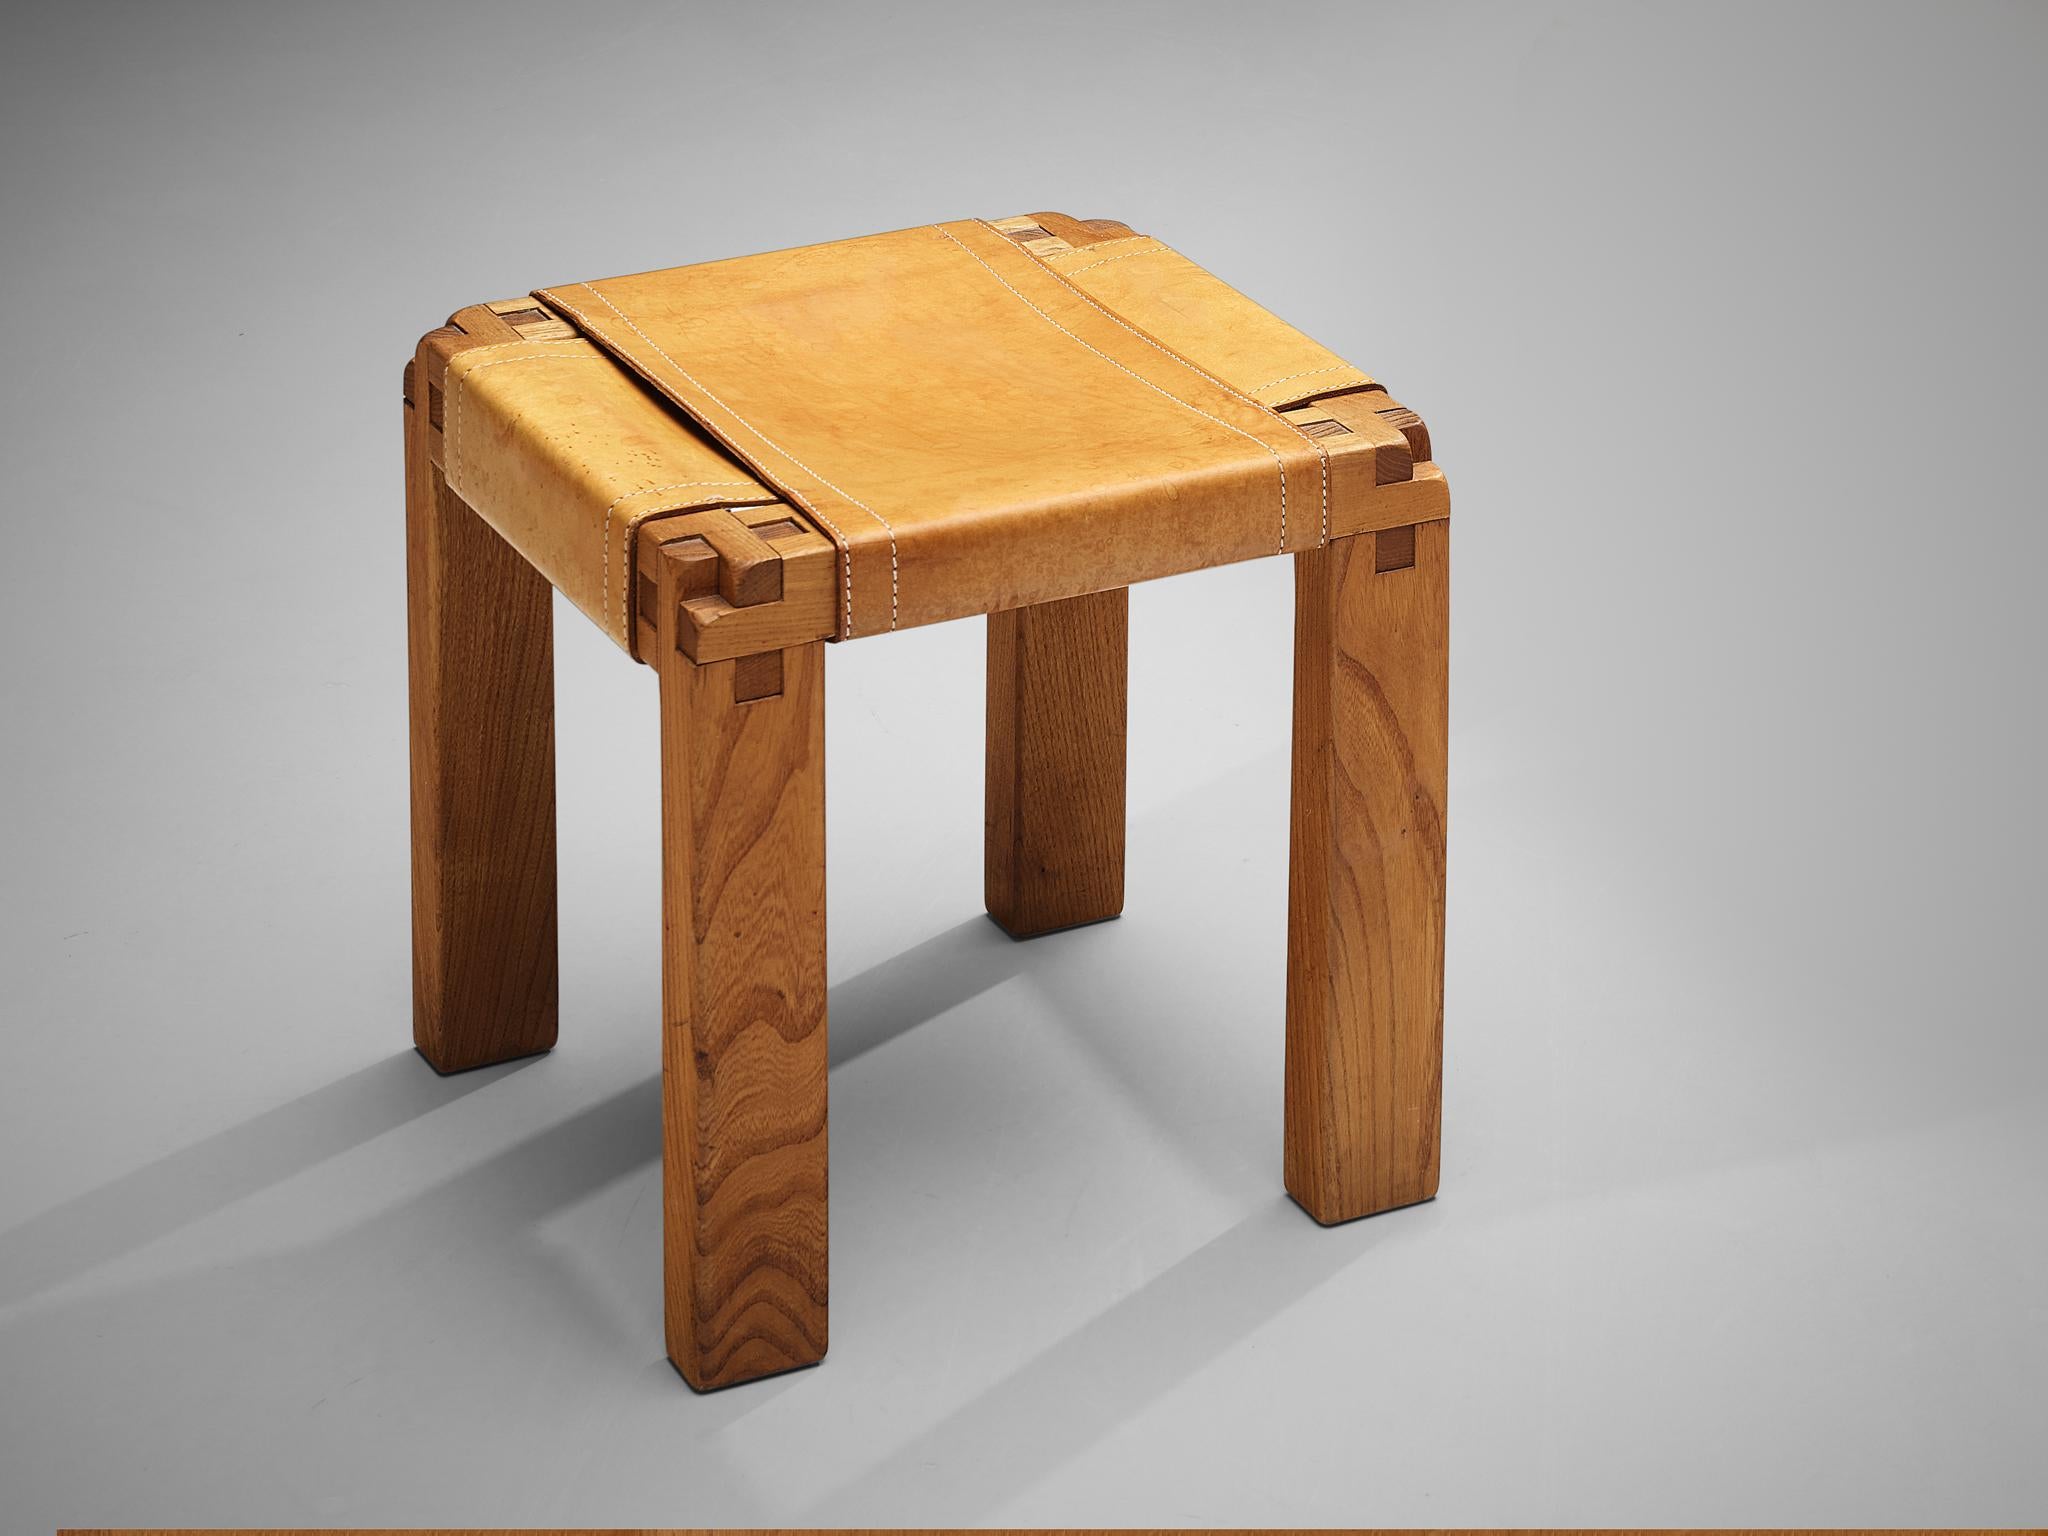 Pierre Chapo, stool S11X, elm, cognac leather, France, circa 1966

The S11X stool by Pierre Chapo shows great craftsmanship. The two leather sheets are wrapped around the elm wood frame. Chapo designed the S11 chairs and the stools with a particular